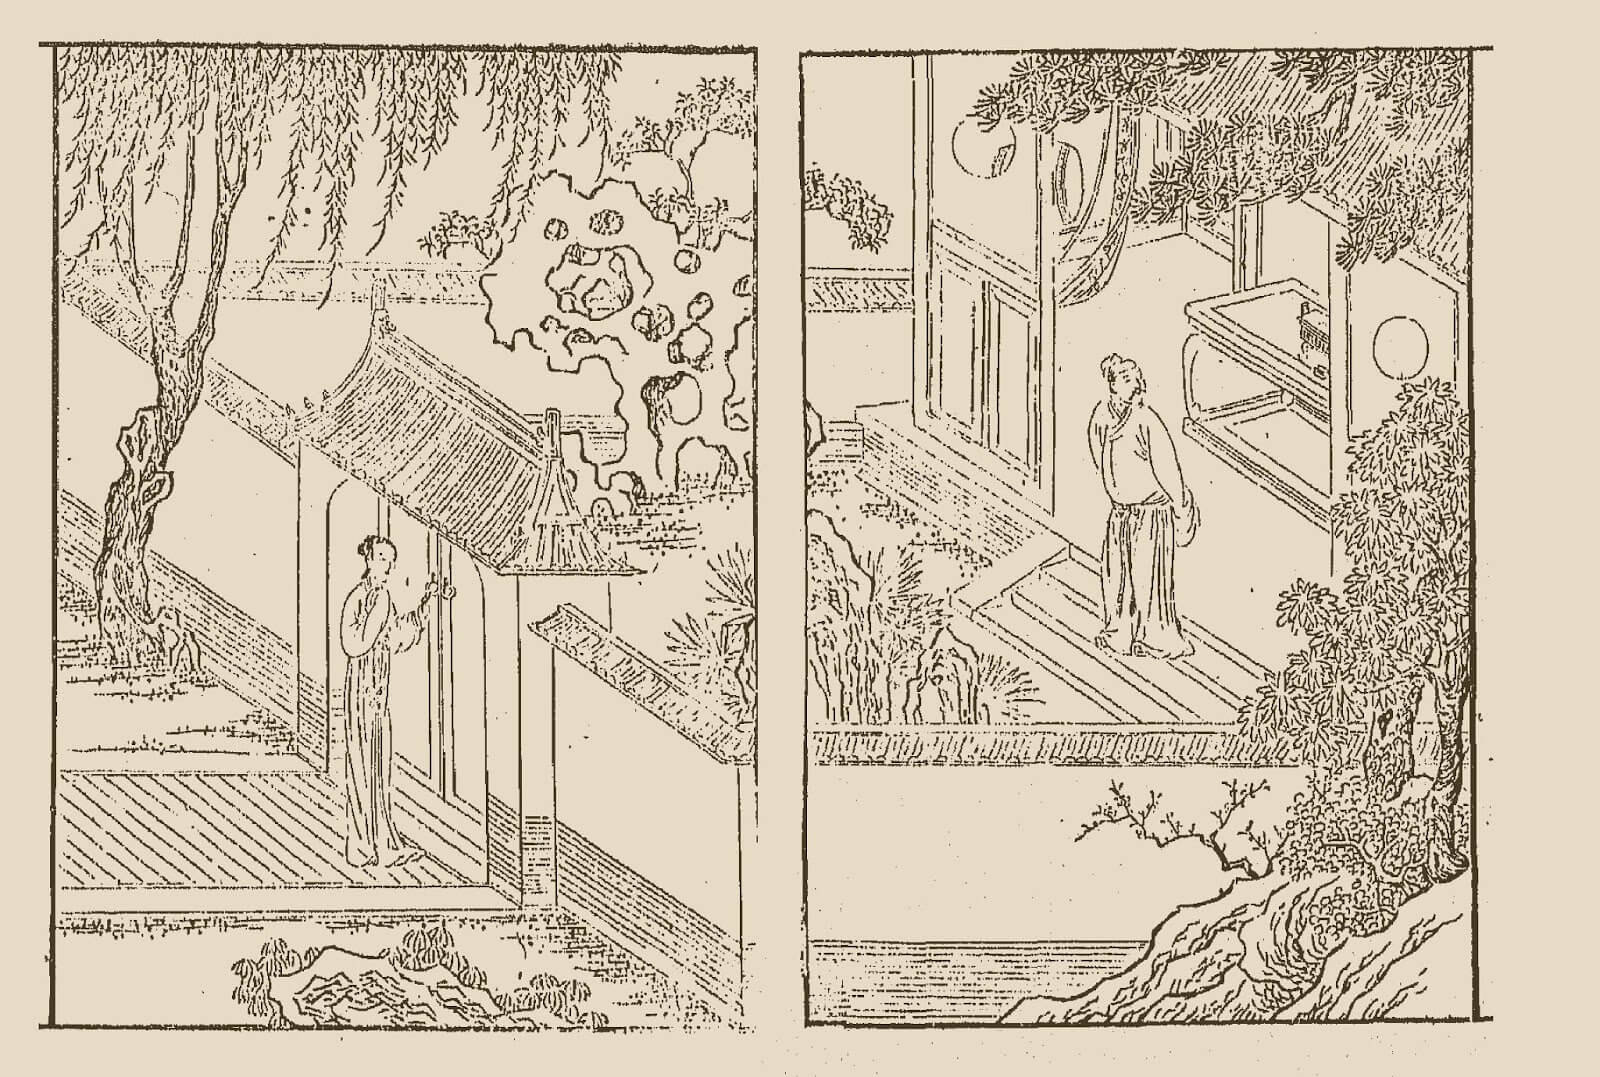 Mulan returns home. Included as an illustration in an early woodblock printing of a collection of Xu Wei’s plays